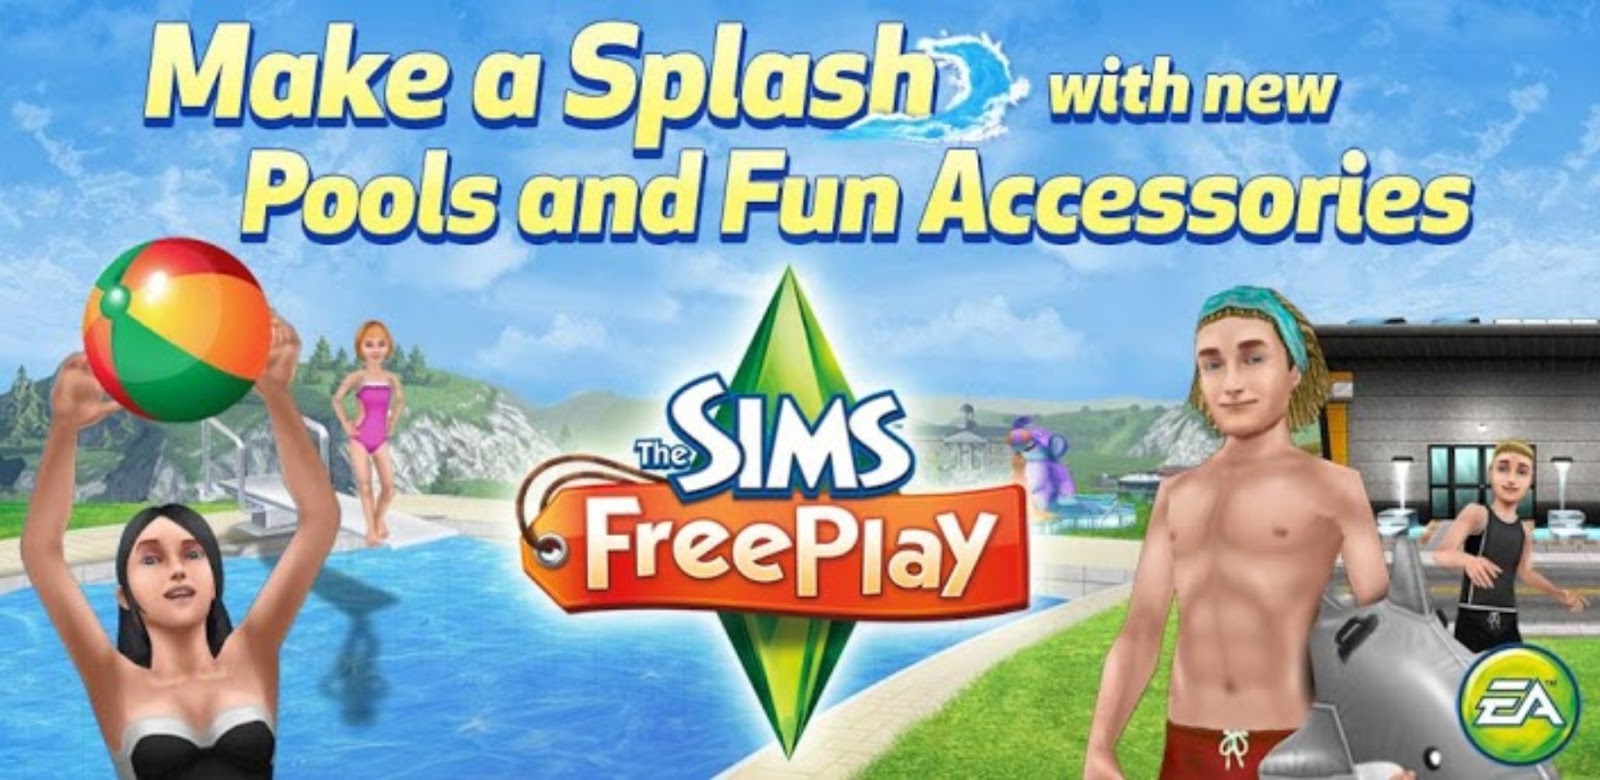 Sims 4 free trial 48 hours